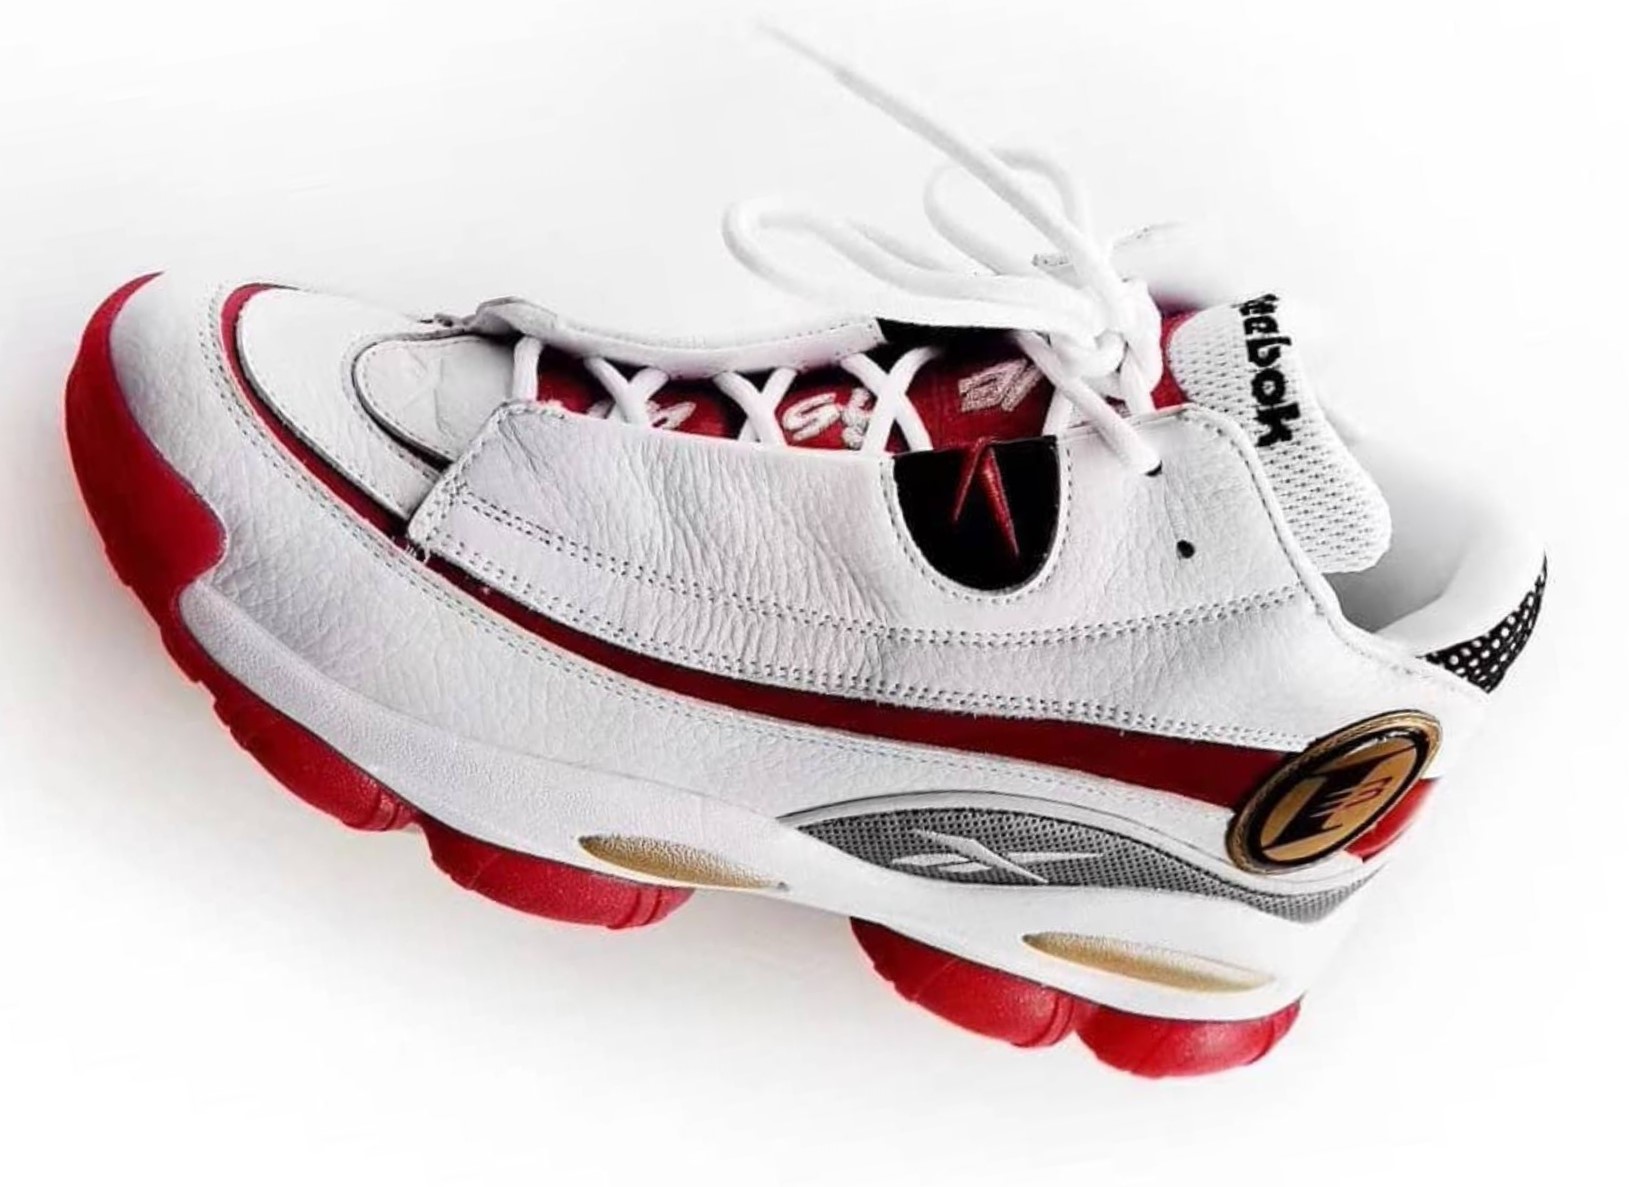 Allen Iverson's Answer 1 'White/Red' is After a 20-Year Hiatus WearTesters